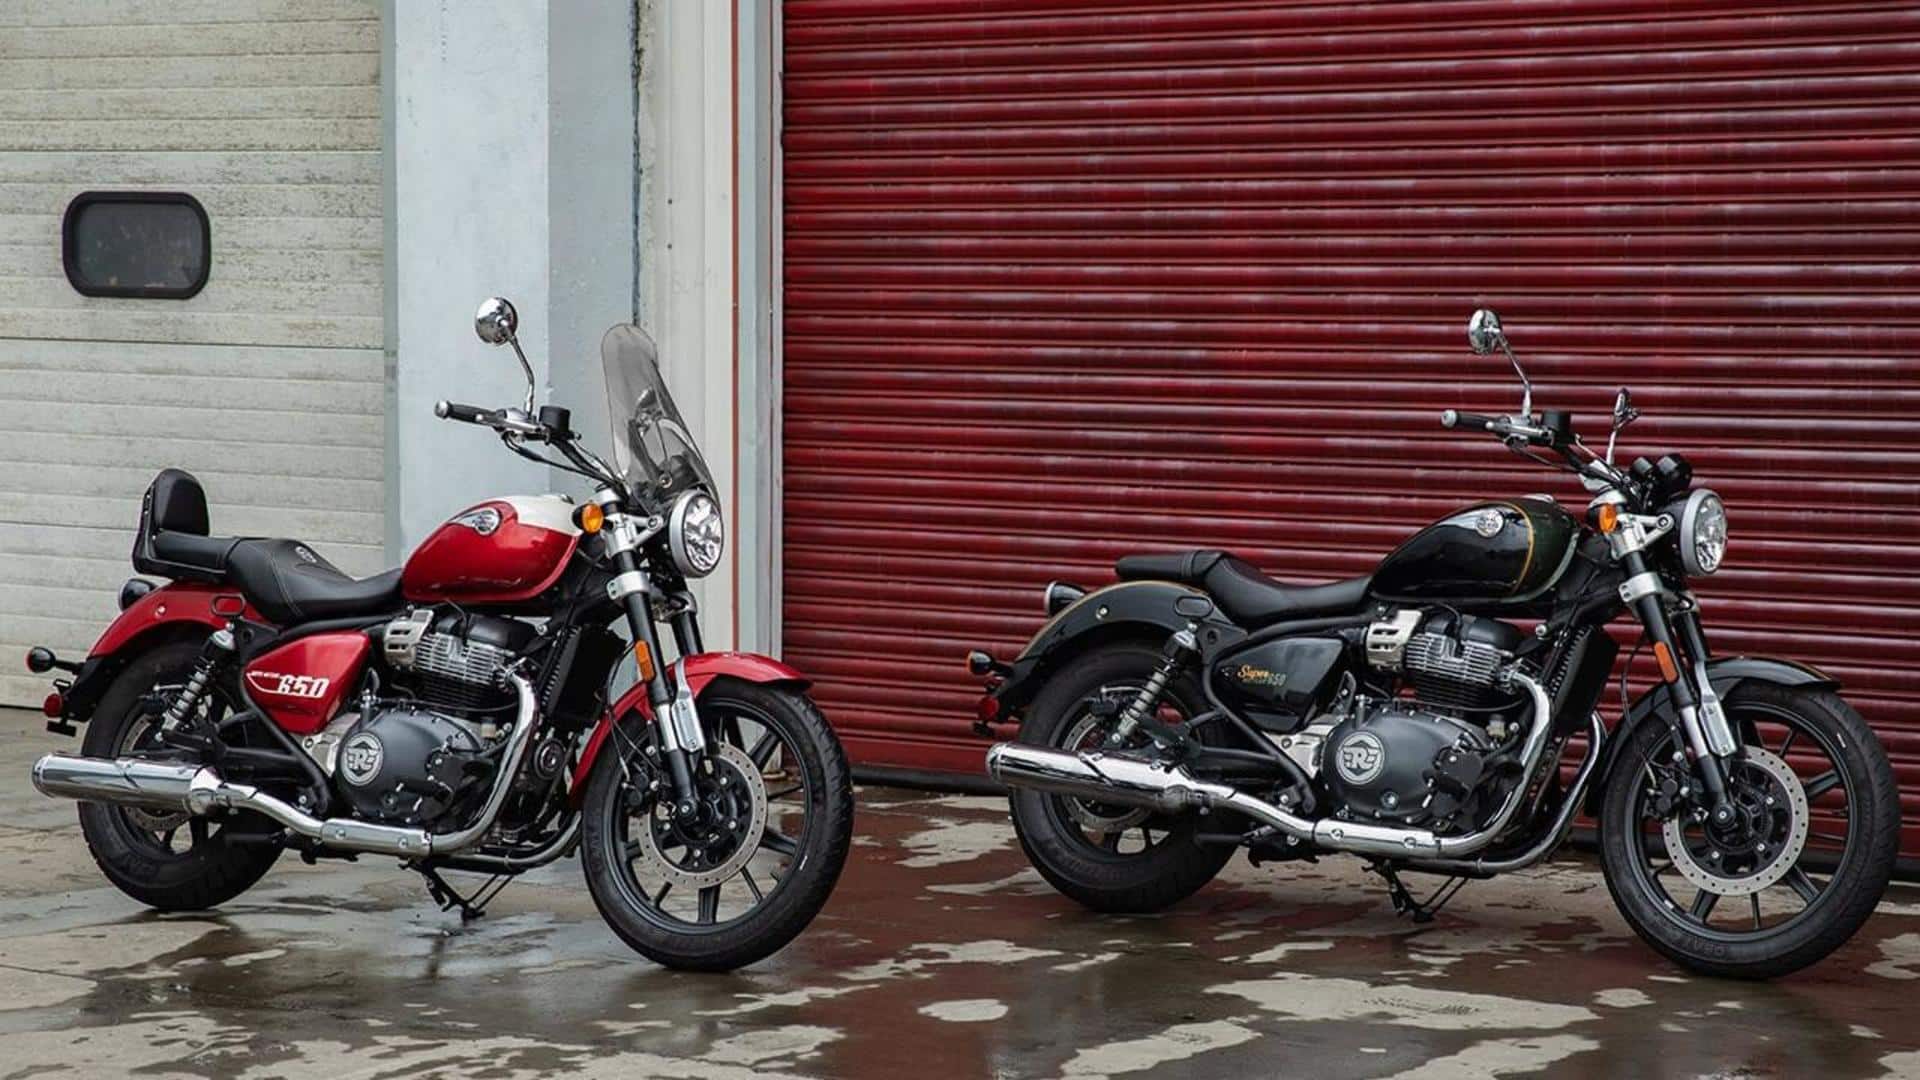 Royal Enfield Super Meteor 650 to debut in January 2023